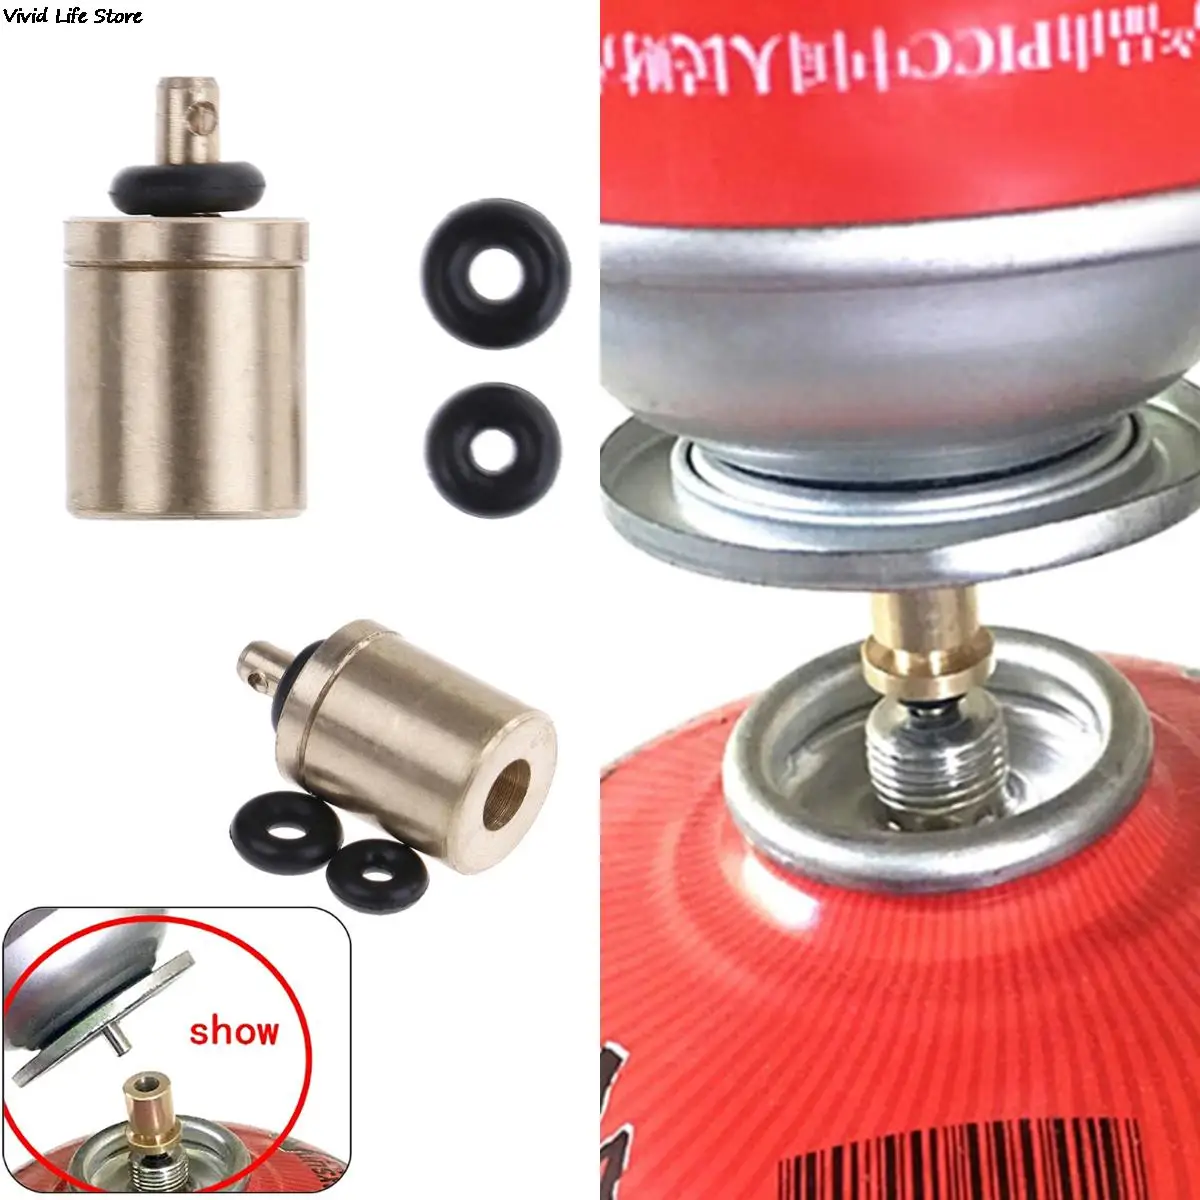 Outdoor Gas Refill Adapter Stove Cylinder Butane Canister Tank Camping BBQ US 